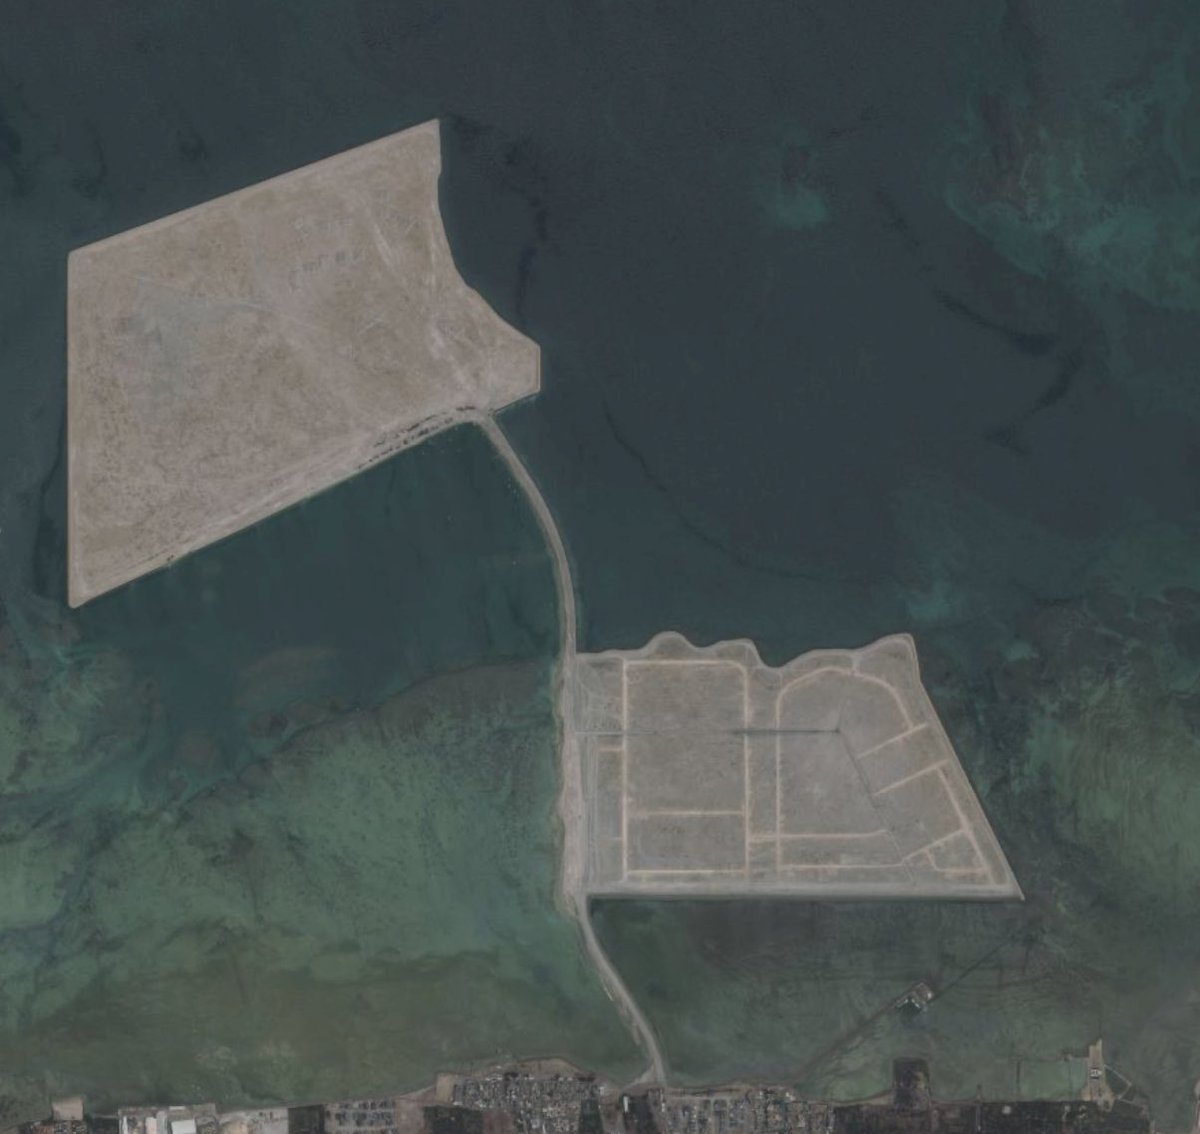 The Nurana Islands are part of the larger Marsa Al Seef Project, consisting of residential villas and office spaces to meet the growing demand of the Bahraini population. Land reclamation is ongoing and only the first phase has been completed.